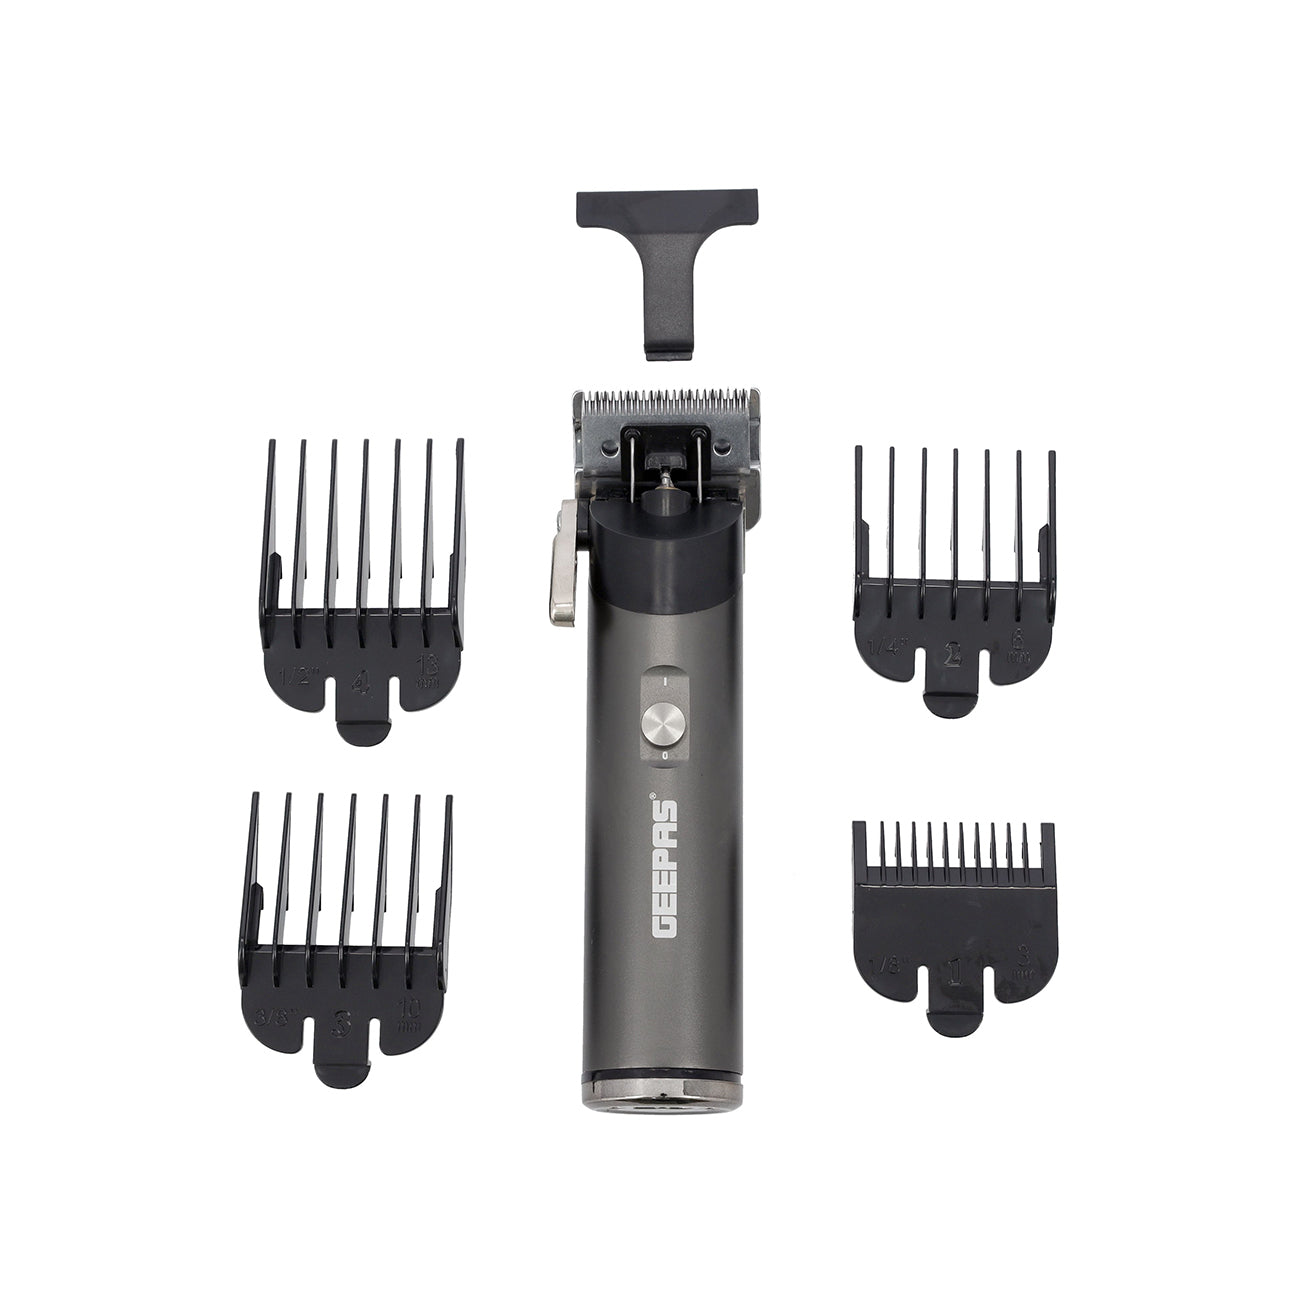 Professional Hair Clipper, Rechargeable Clipper, GTR56029 | Cordless Hair Clipper With 4 Guide Comb | Comes With Brush And Oil